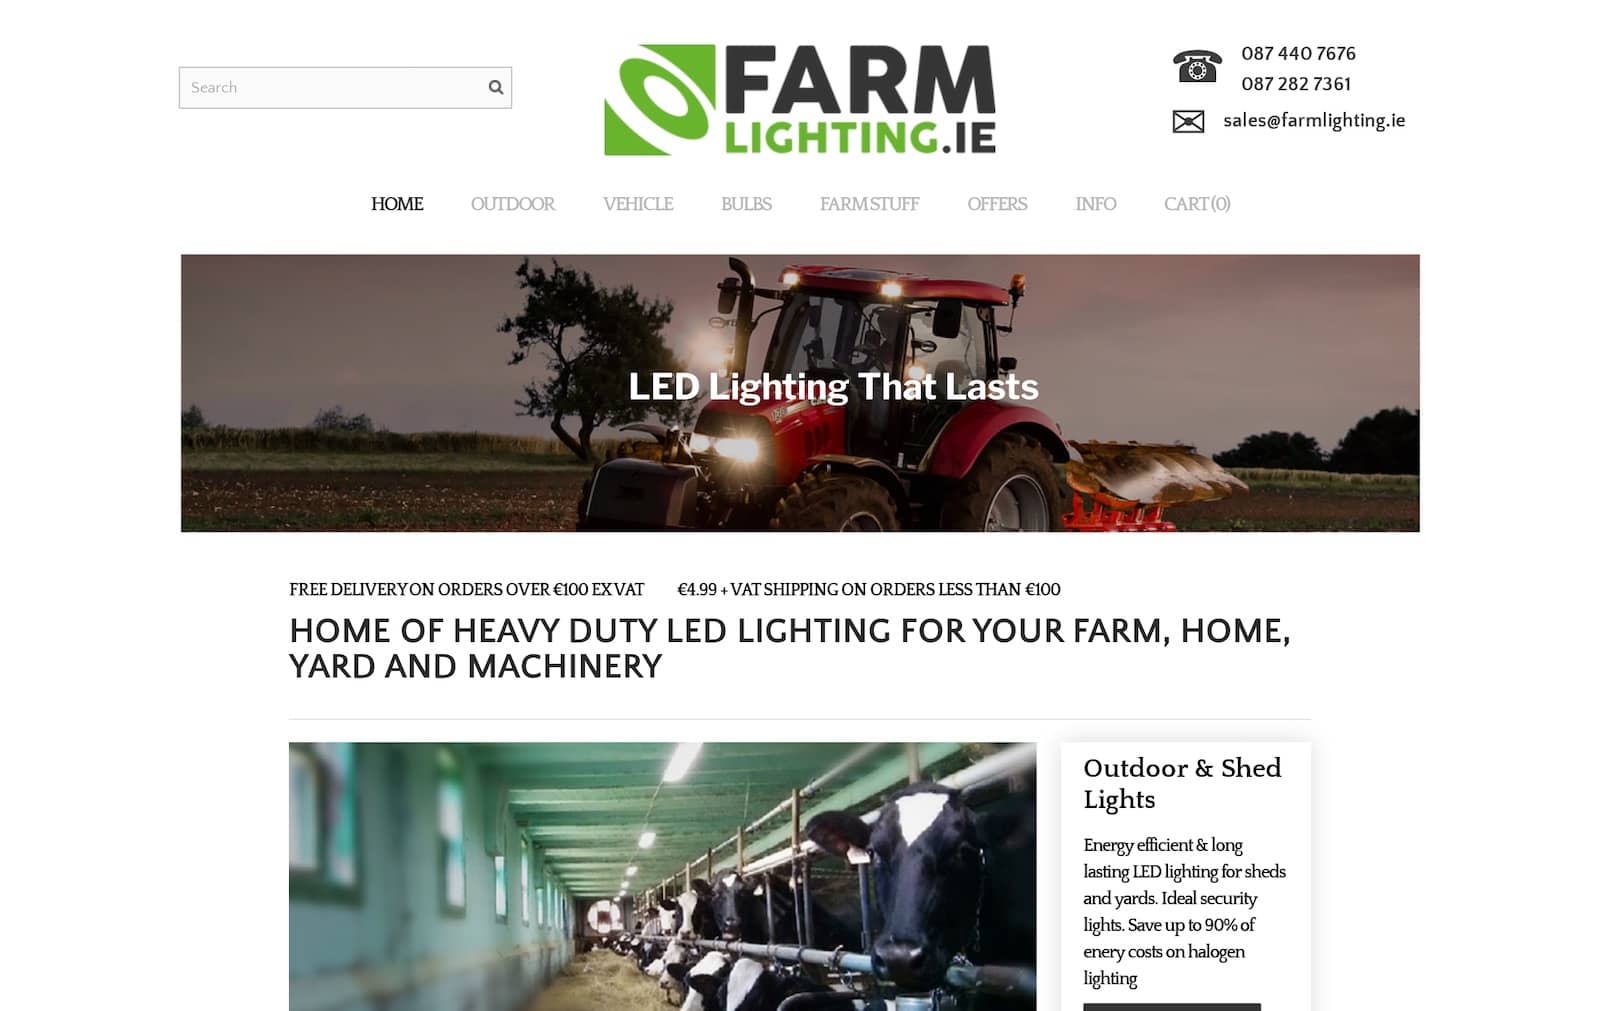 Farm Lighting is another example of an ecommerce store selling physical products and using Weebly to power the site.